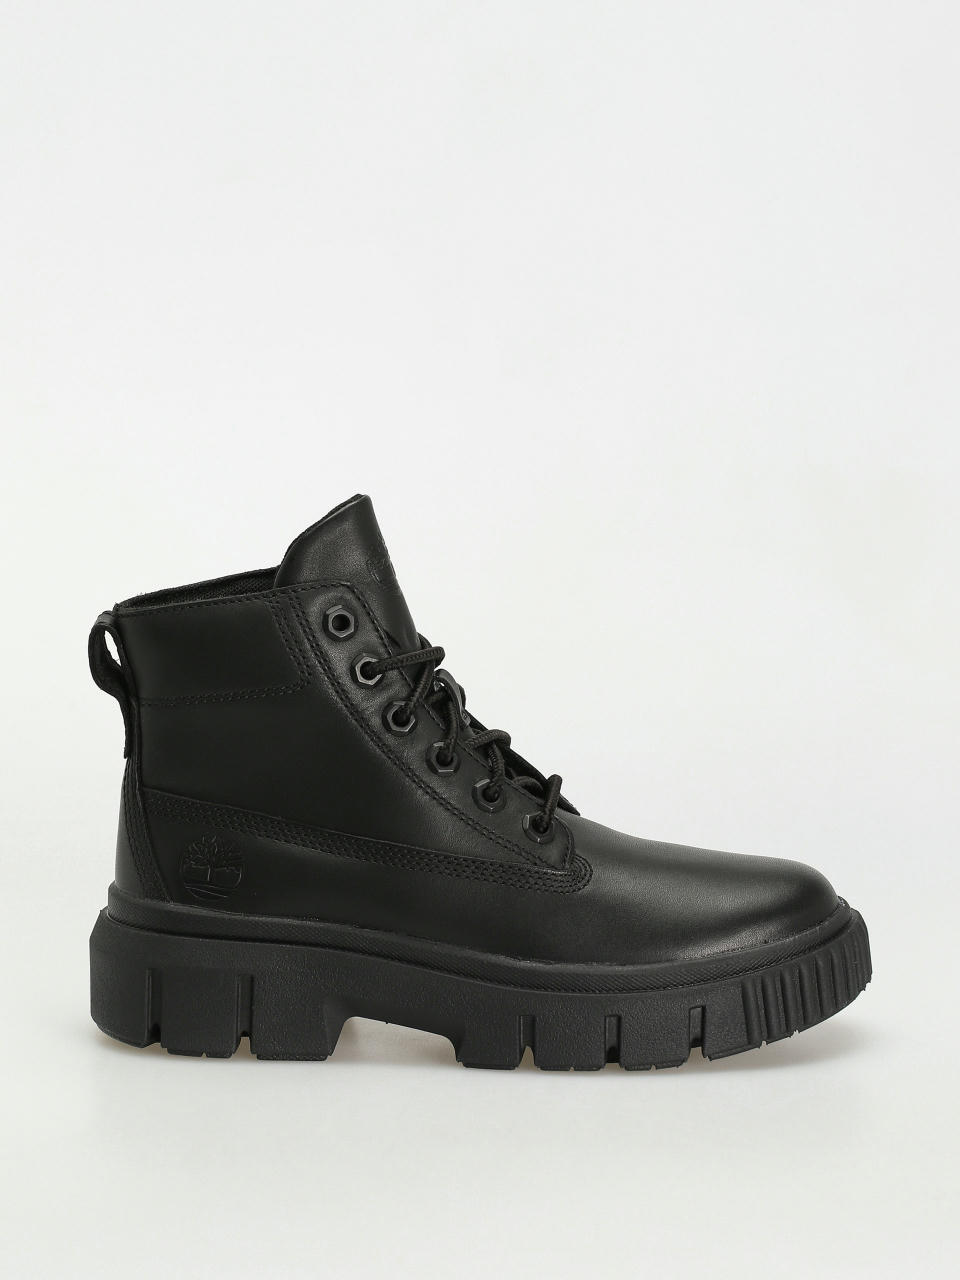 Timberland Greyfield Leather Boot Shoes Wmn (black full grain)